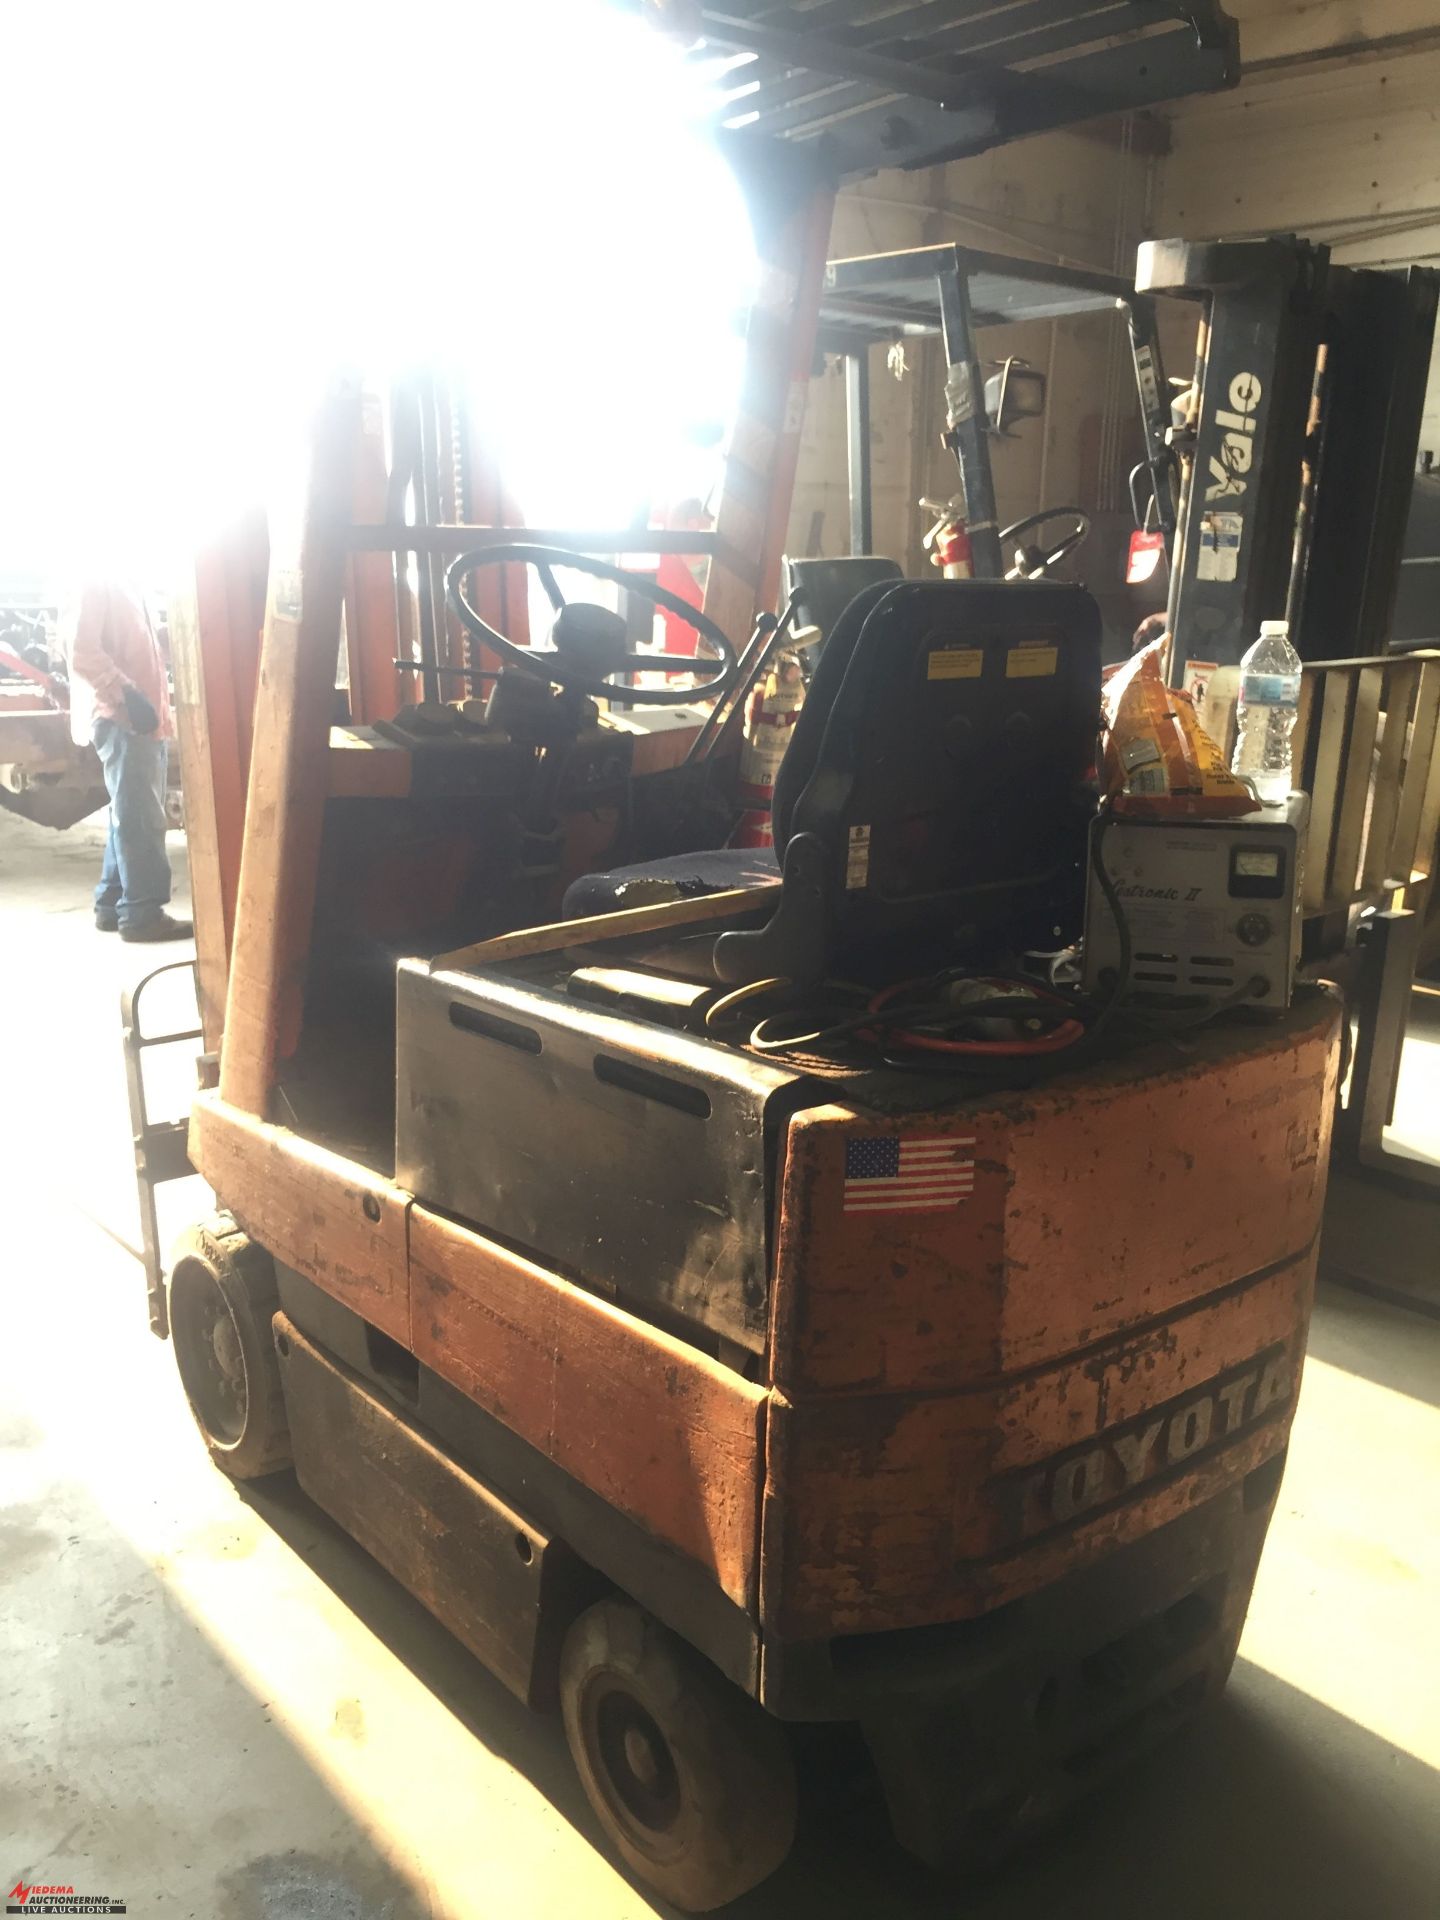 TOYOTA ELECTRIC FORKLIFT, MODEL # 2FBCA15, 36 VOLT, COMES WITH CHARGER, UNIT NEEDS REPAIR, SOMETIMES - Image 2 of 5